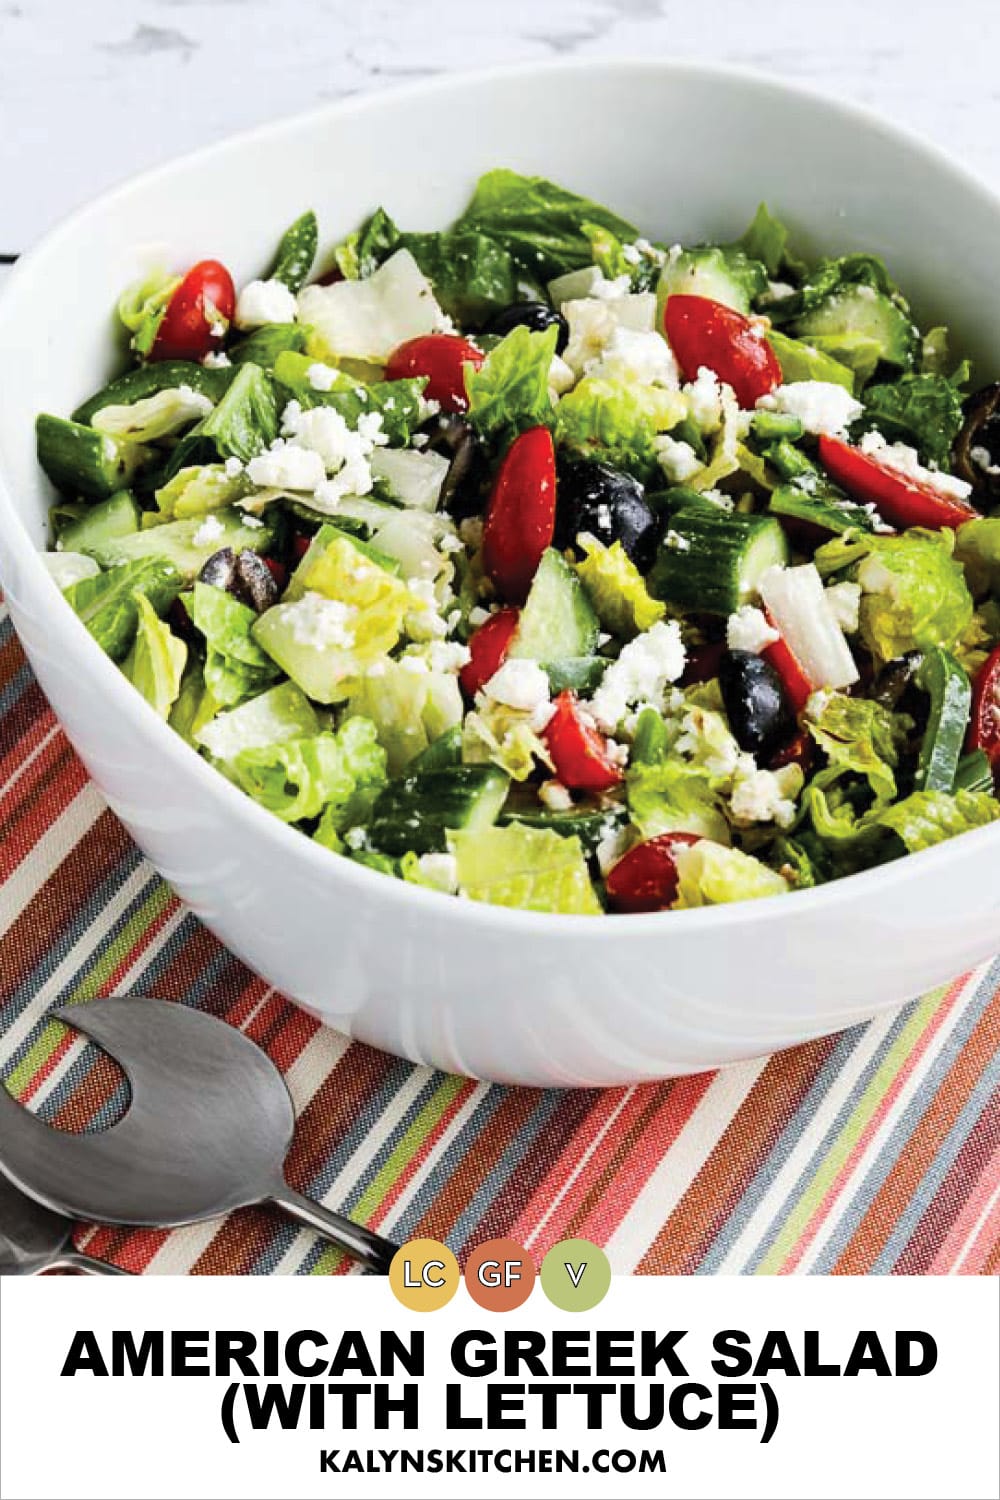 Pinterest image of American Greek salad with lettuce